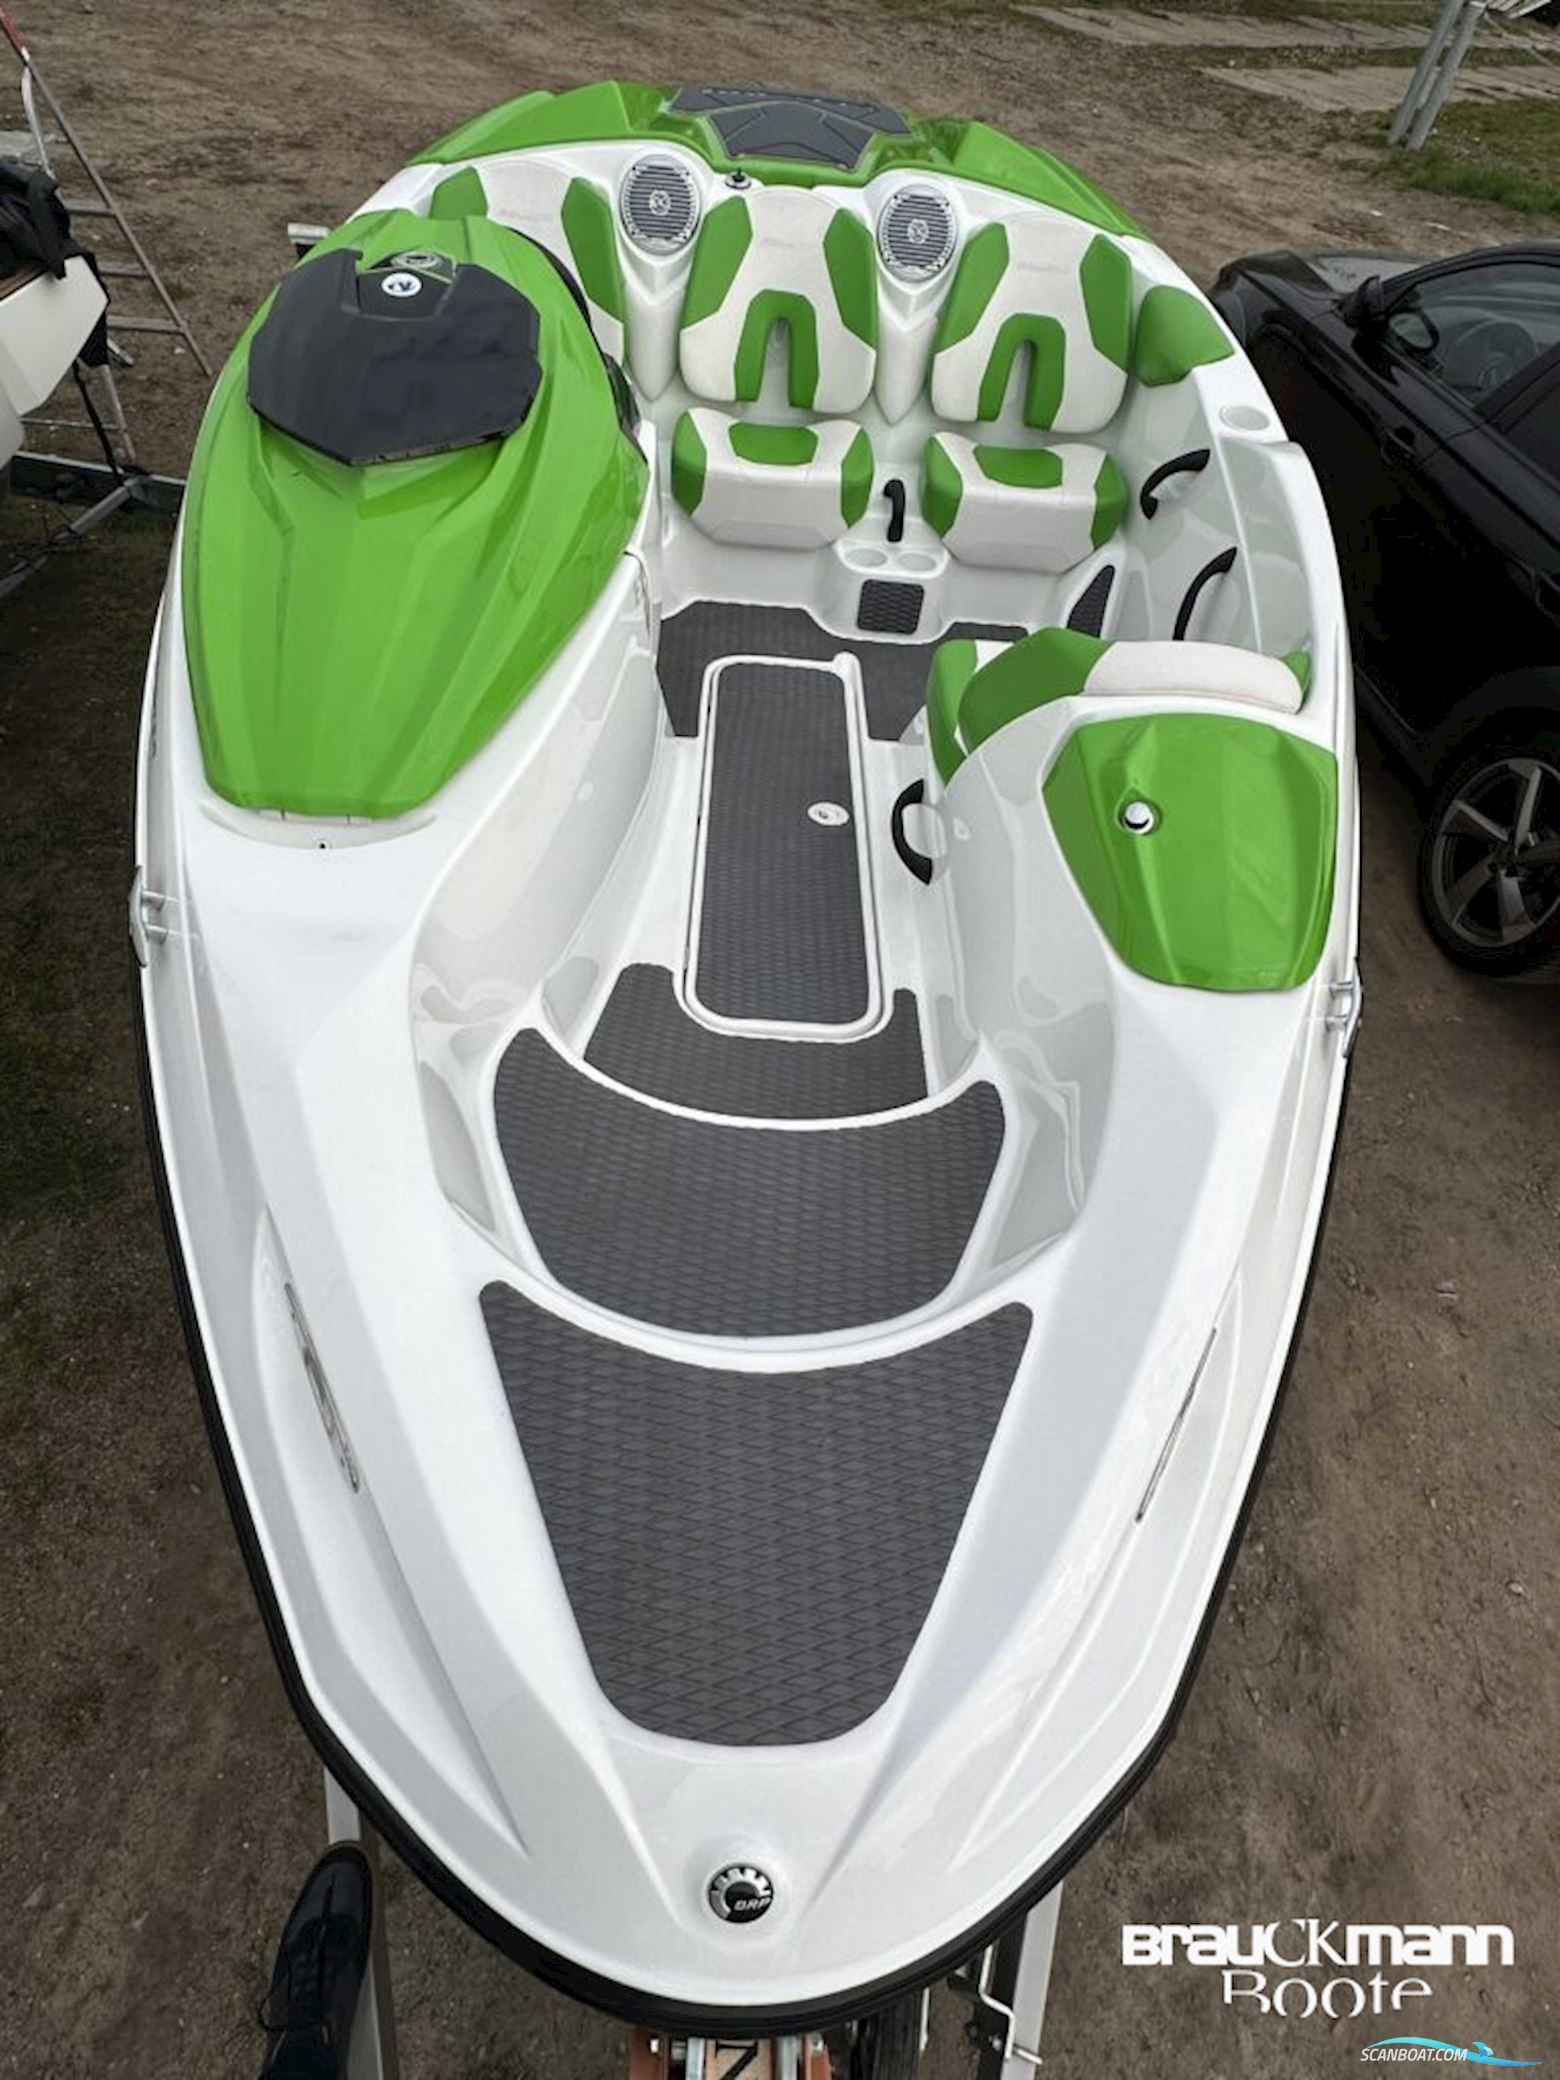 Sea Doo 150 Speedster Motor boat 2012, with Rotax engine, Germany